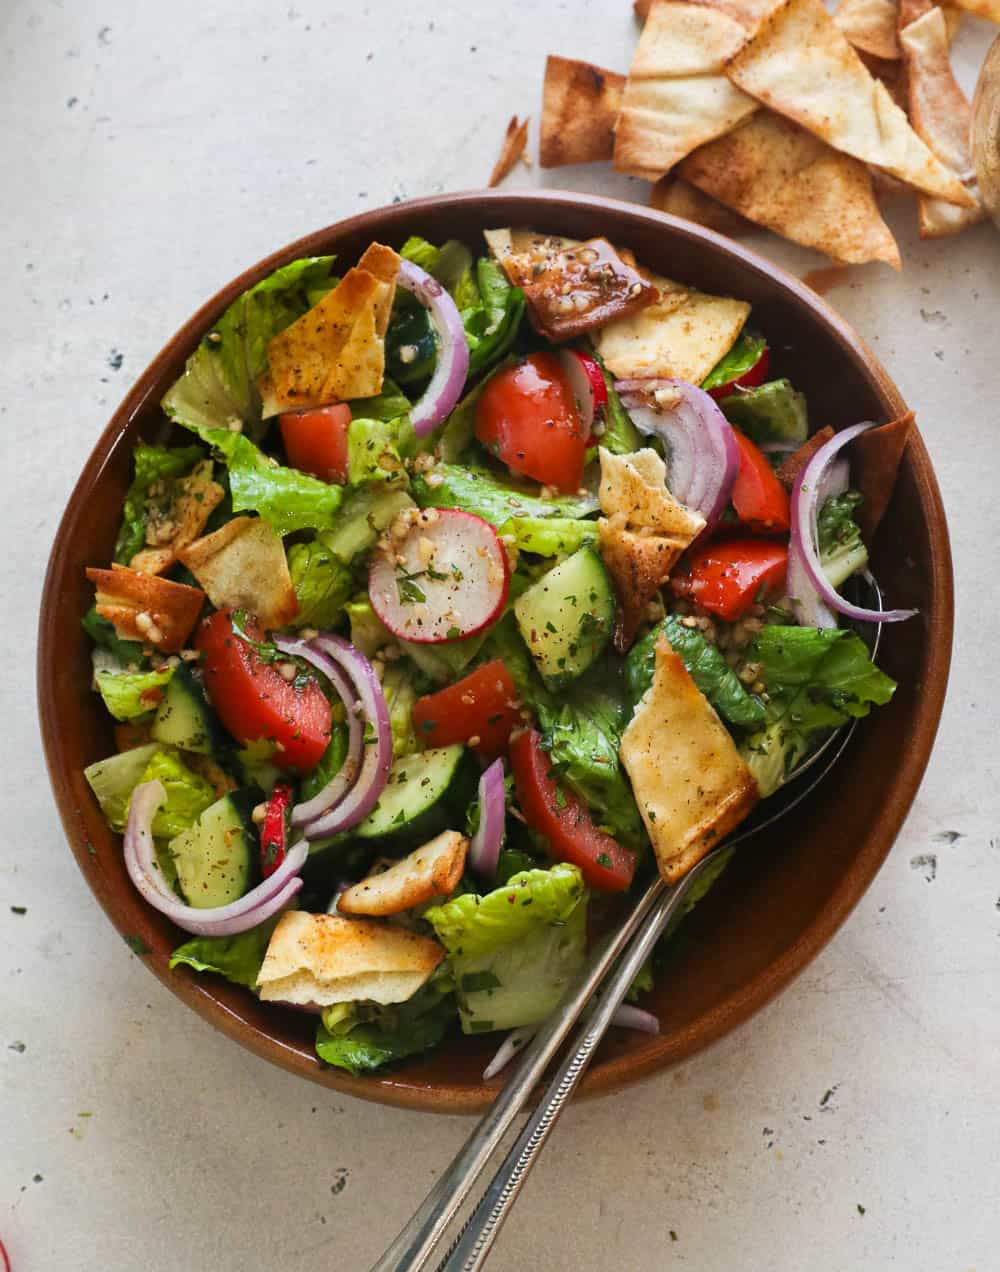 Fattoush Salad in a Brown Bowl with Serving Spoon